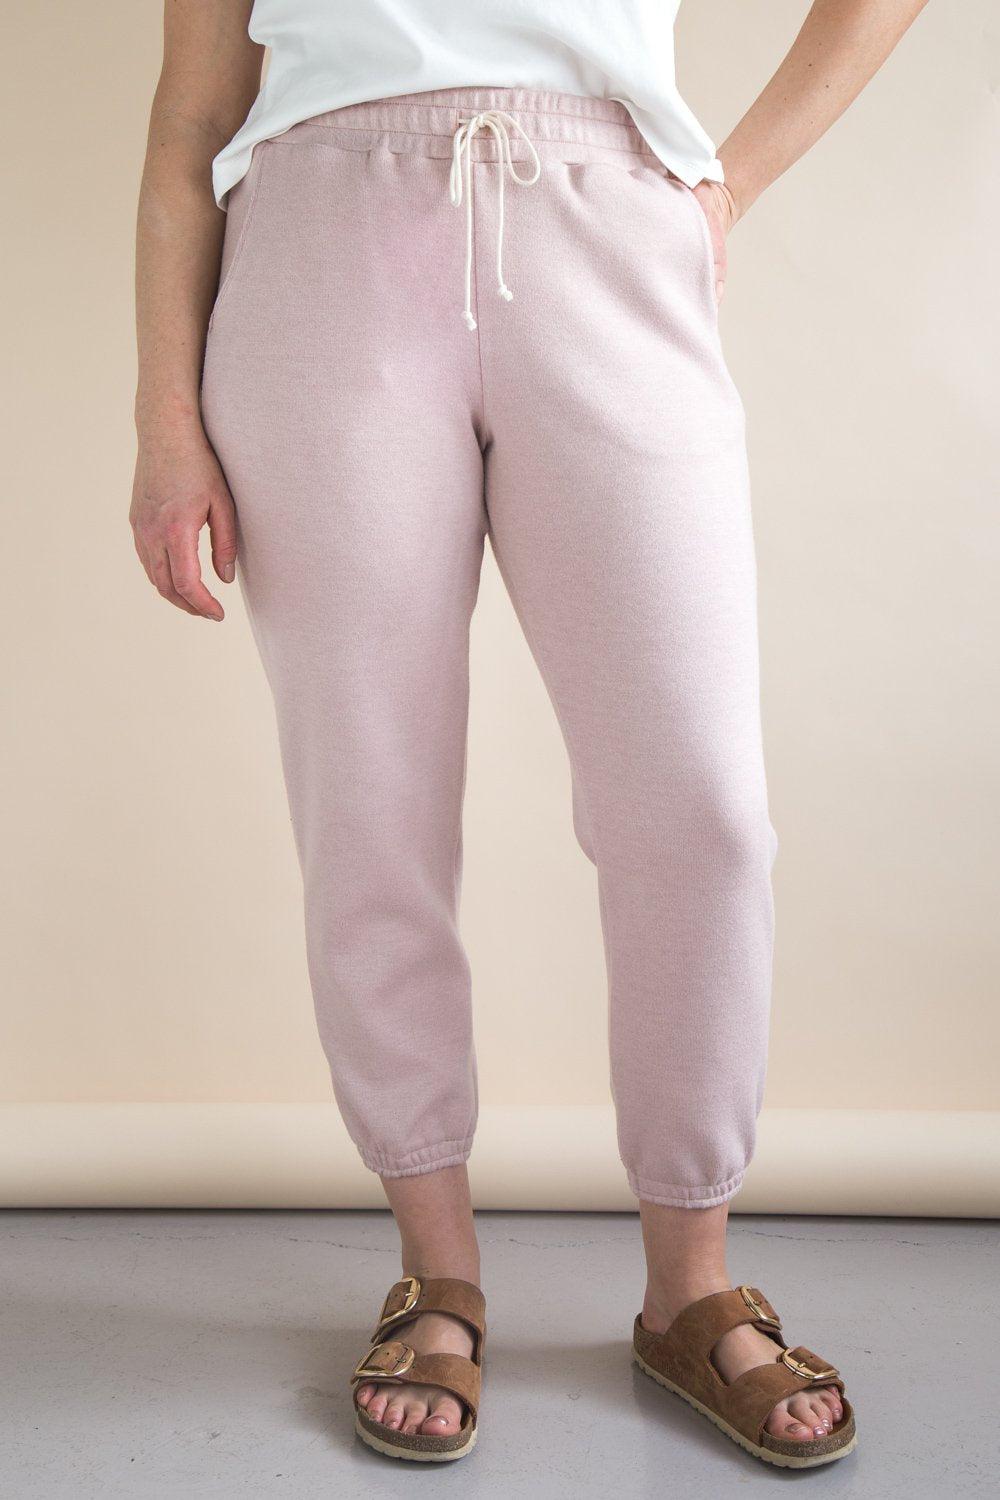 From cozy to stylish: The best women's joggers sewing patterns